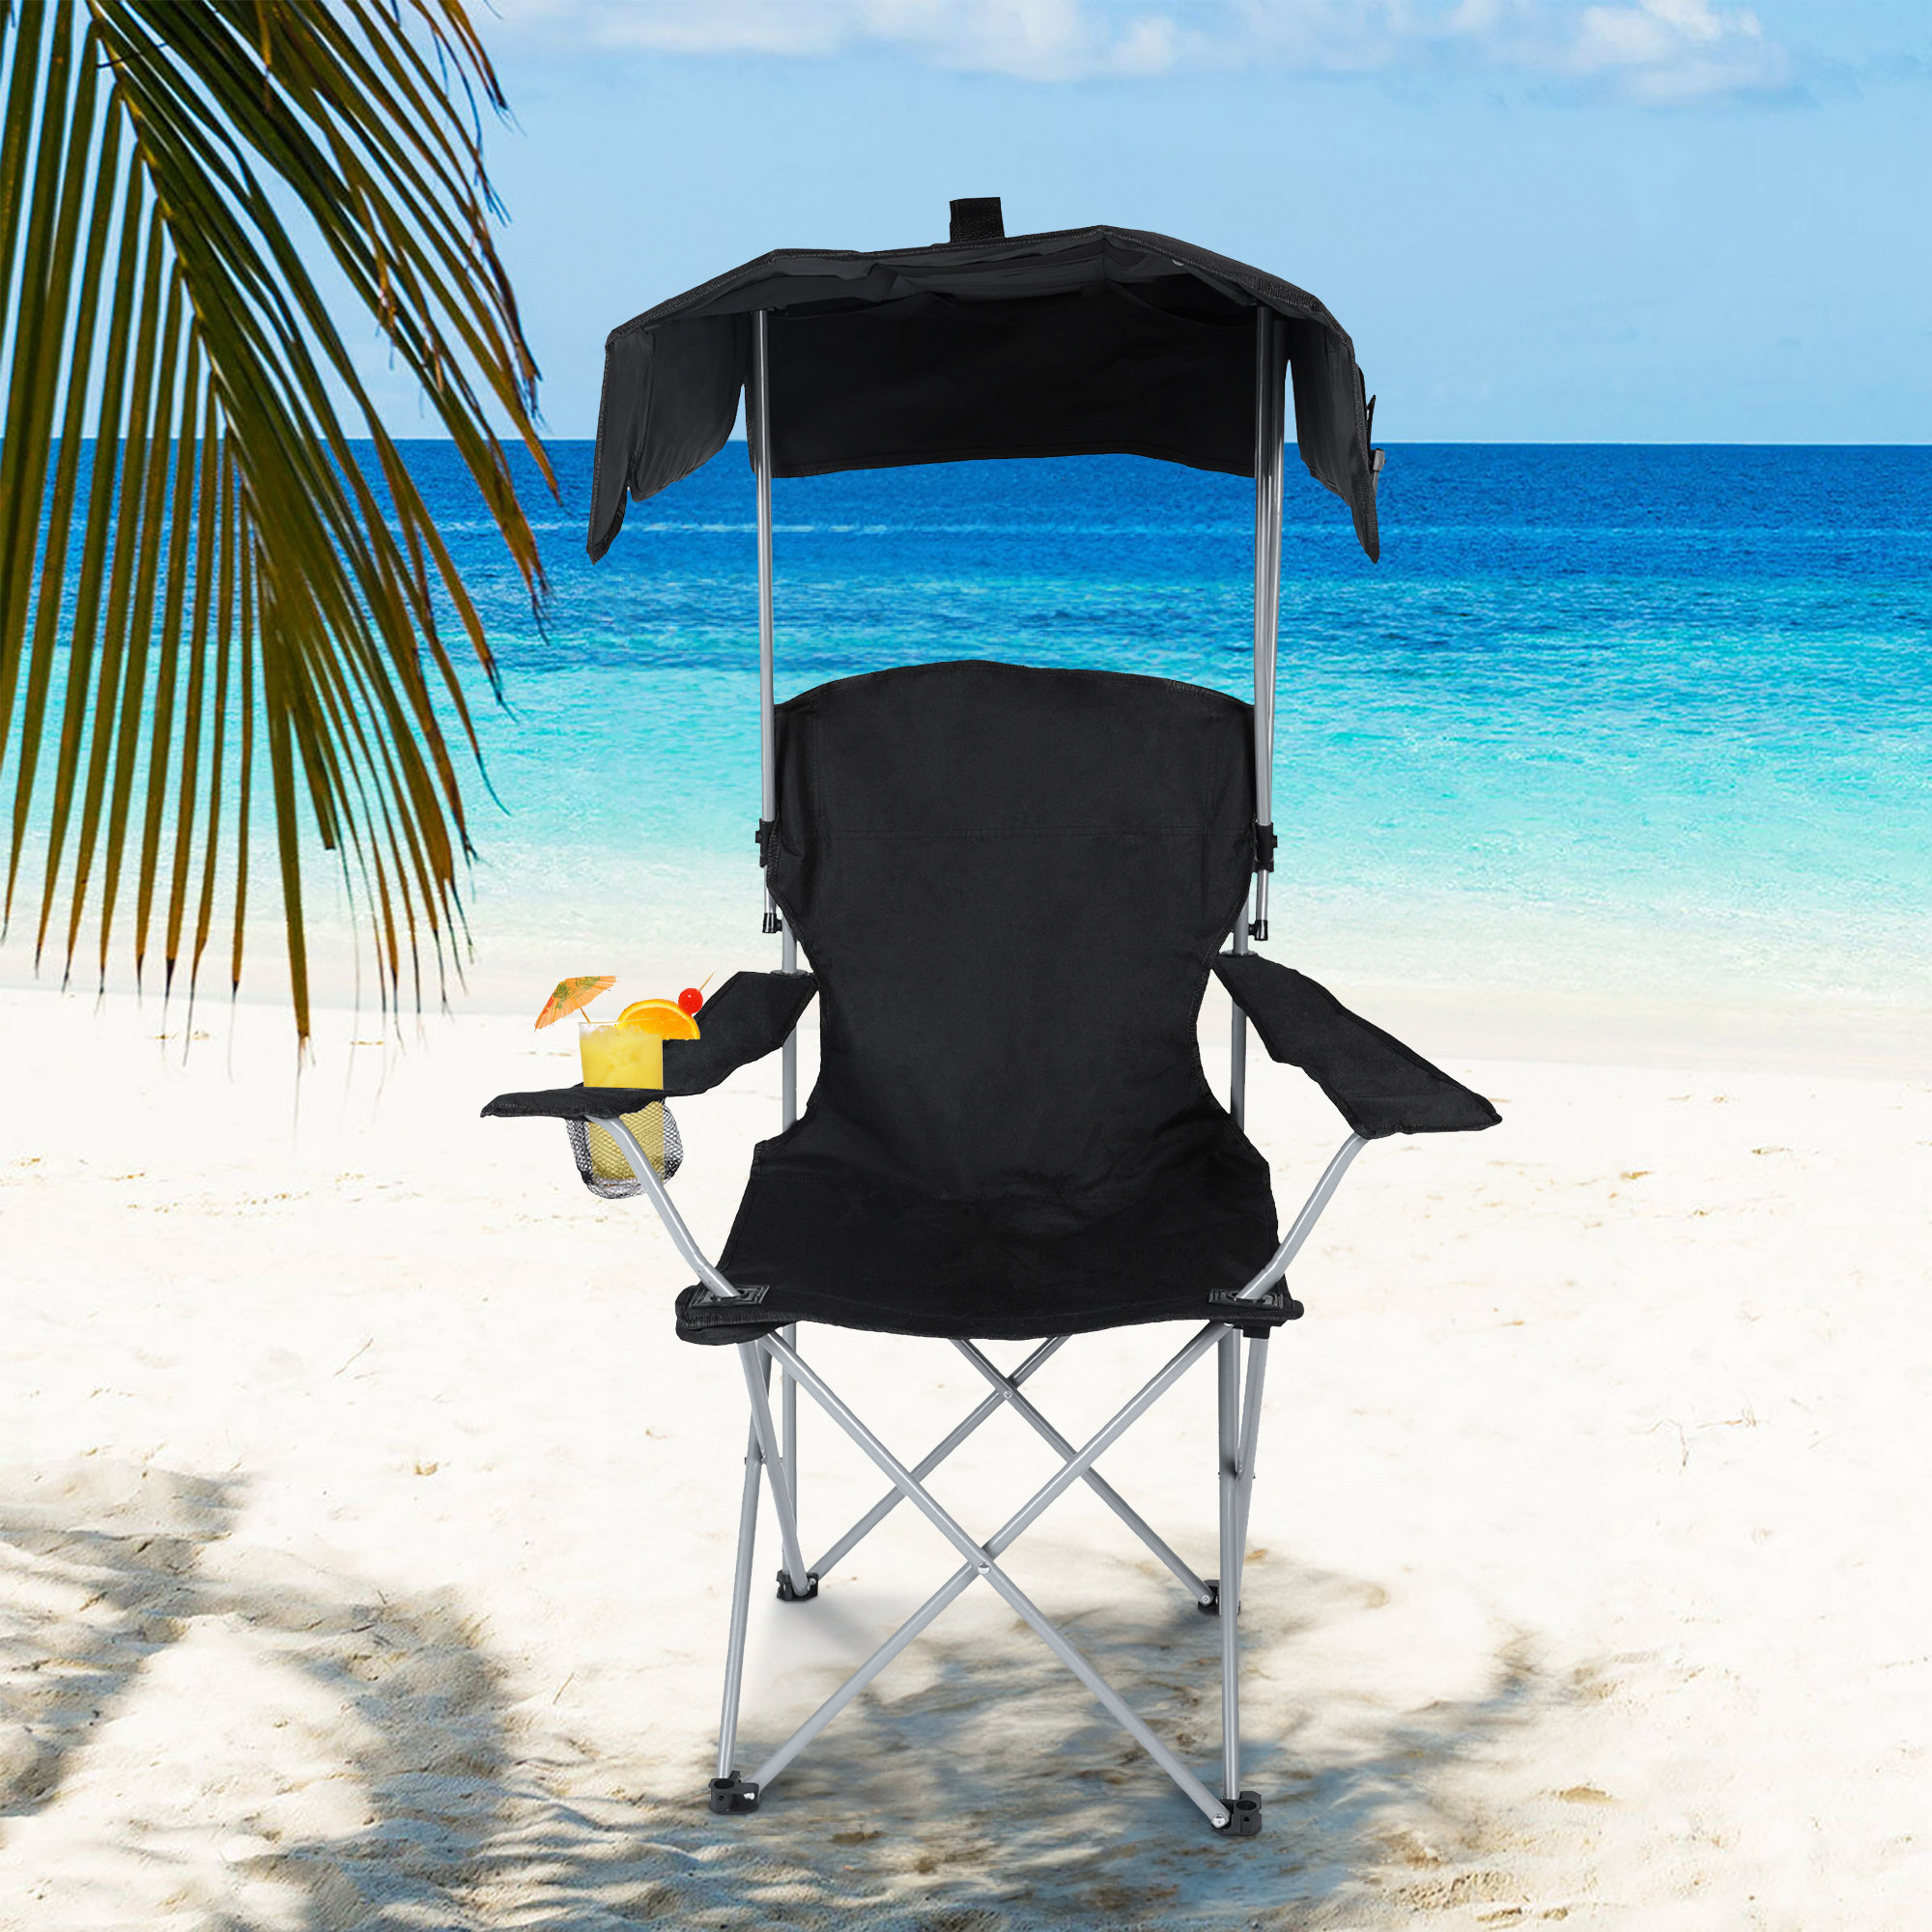 Arlmont & Co. Minodor Portable Lounge Chair Camping Chair with Umbrella and  Cup Holder Black for Camping Hiking & Reviews